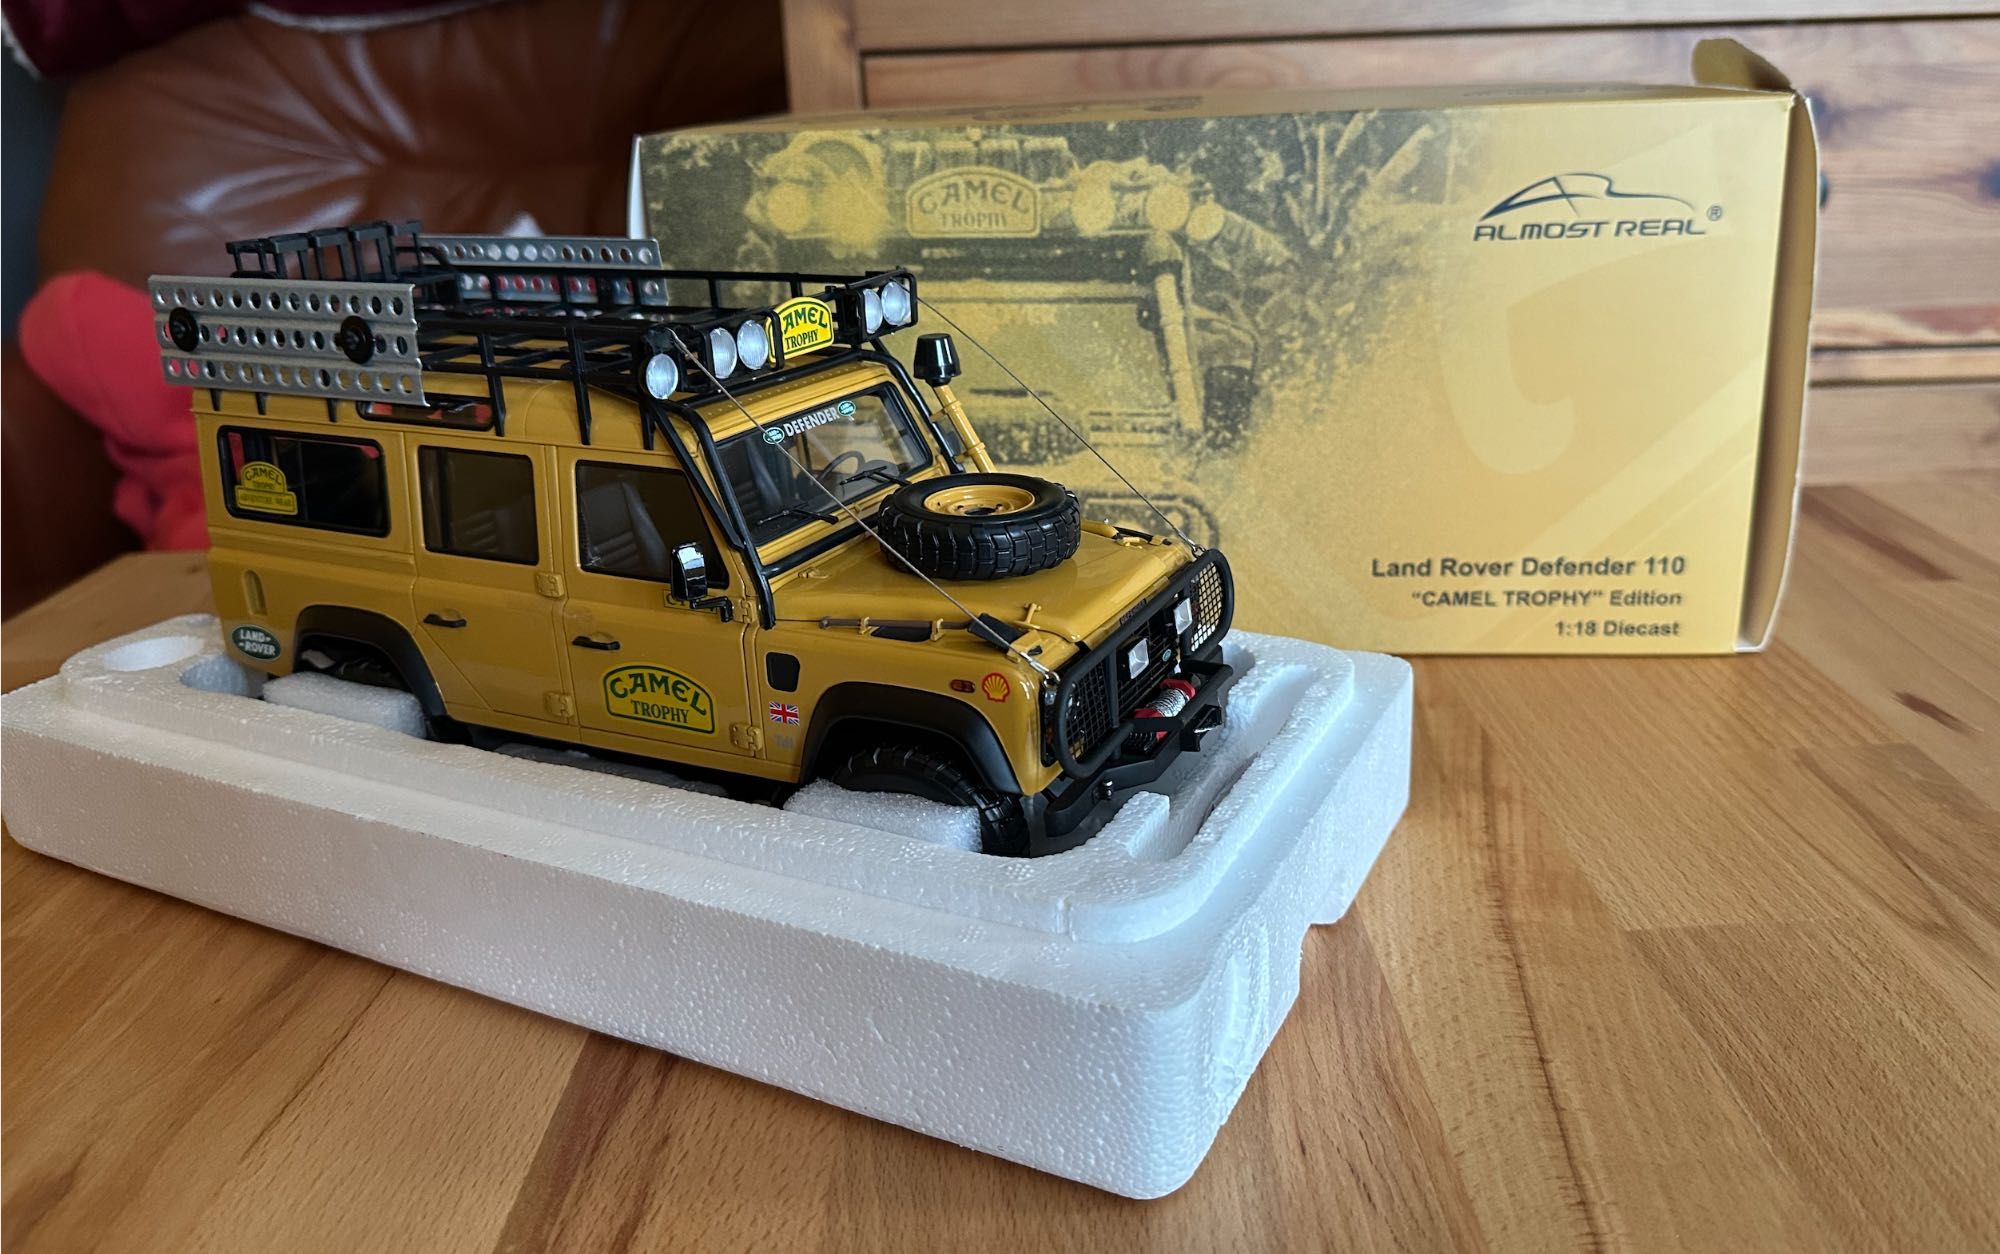 Land Rover Defender 110 "Camel Trophy" Edition 1:18 Almost Real